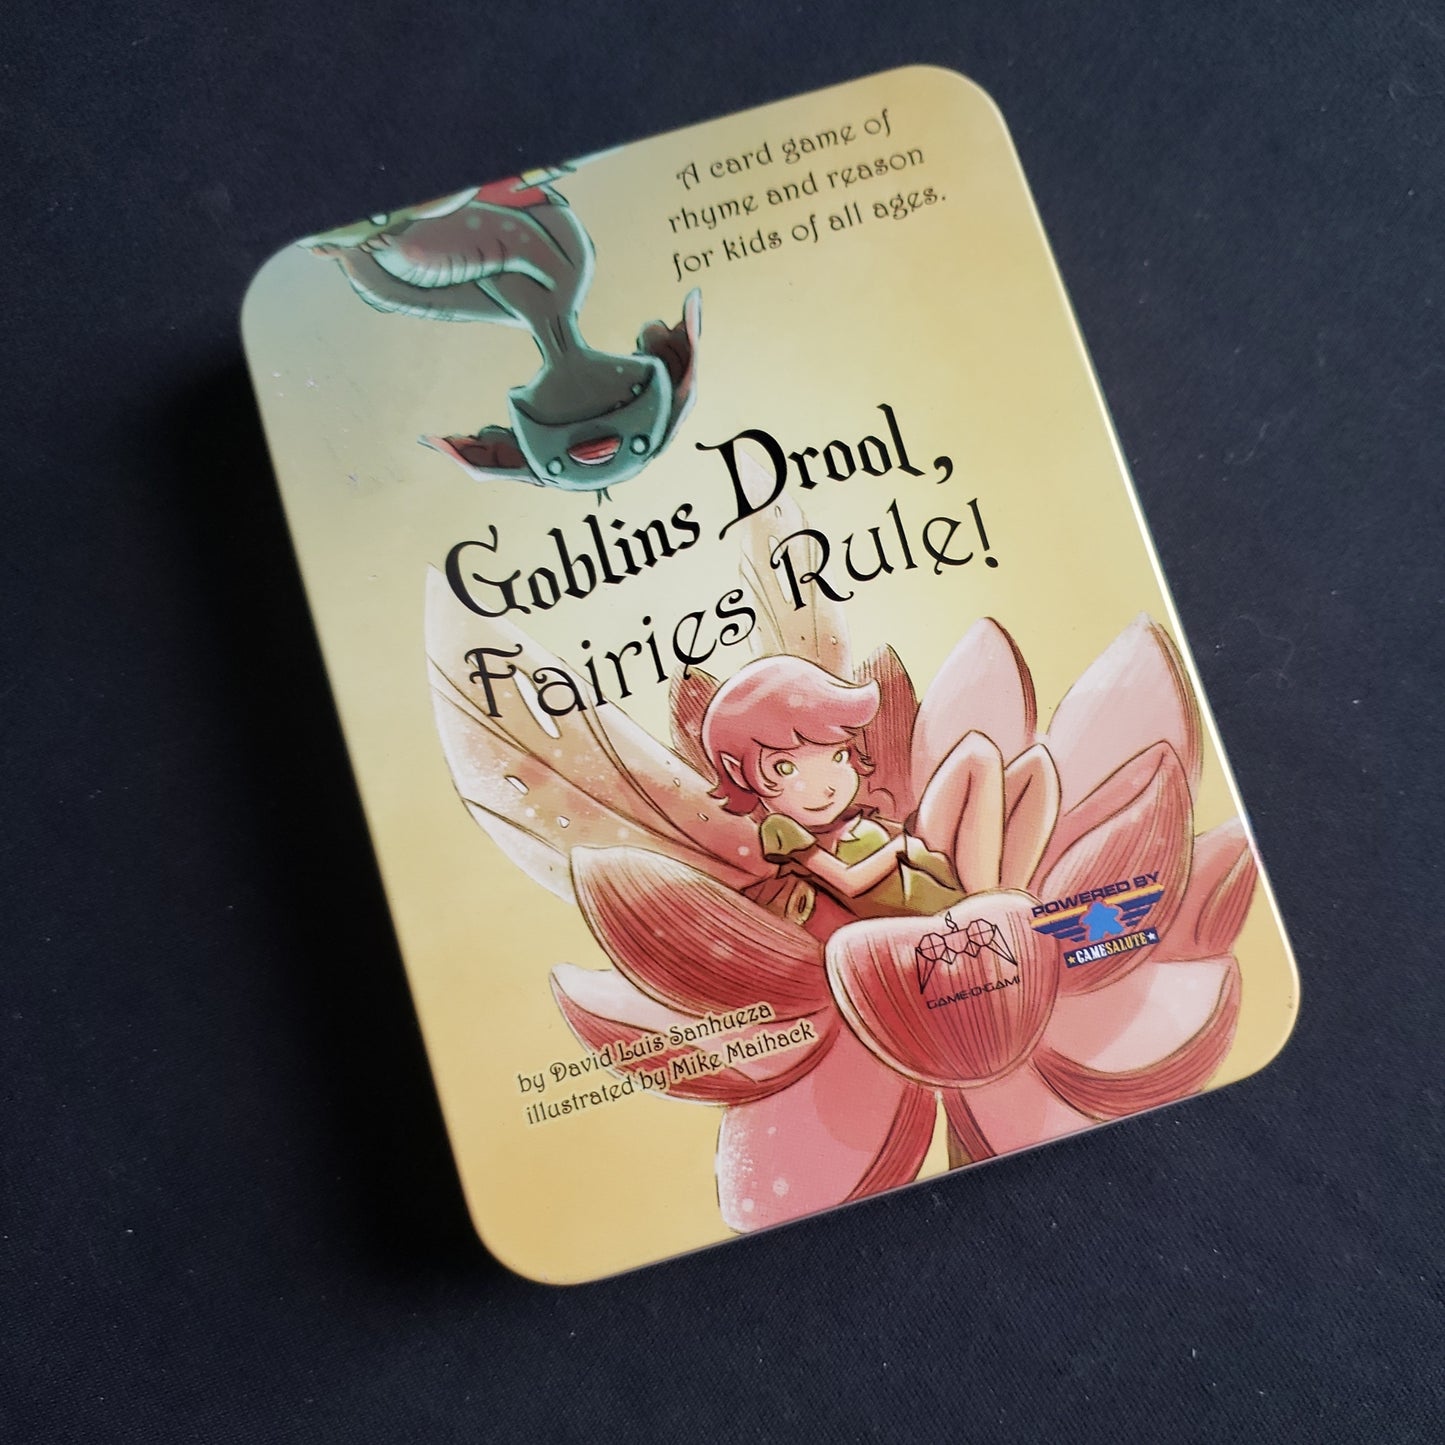 Image shows the front cover of the box of the Goblins Drool, Fairies Rule! card game